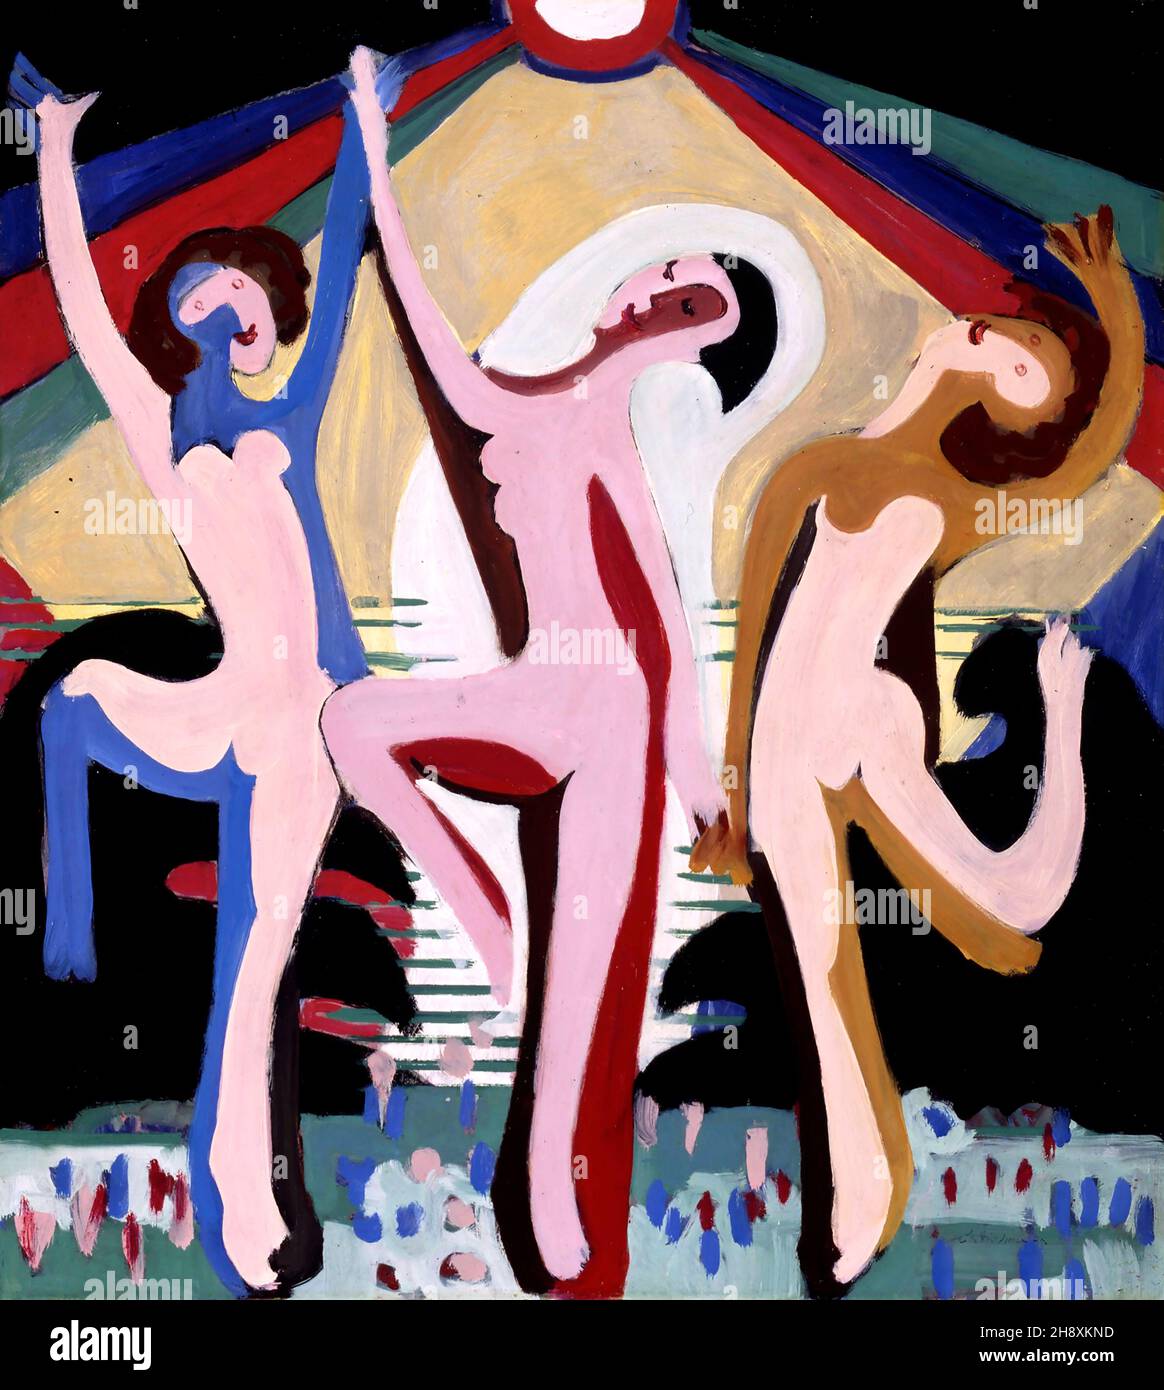 Colorful Dance I: Design for the Ceremonial Hall at the Museum Folkwang by Ernst Ludwig Kirchner (1880-1938), oil on canvas, 1932 Stock Photo